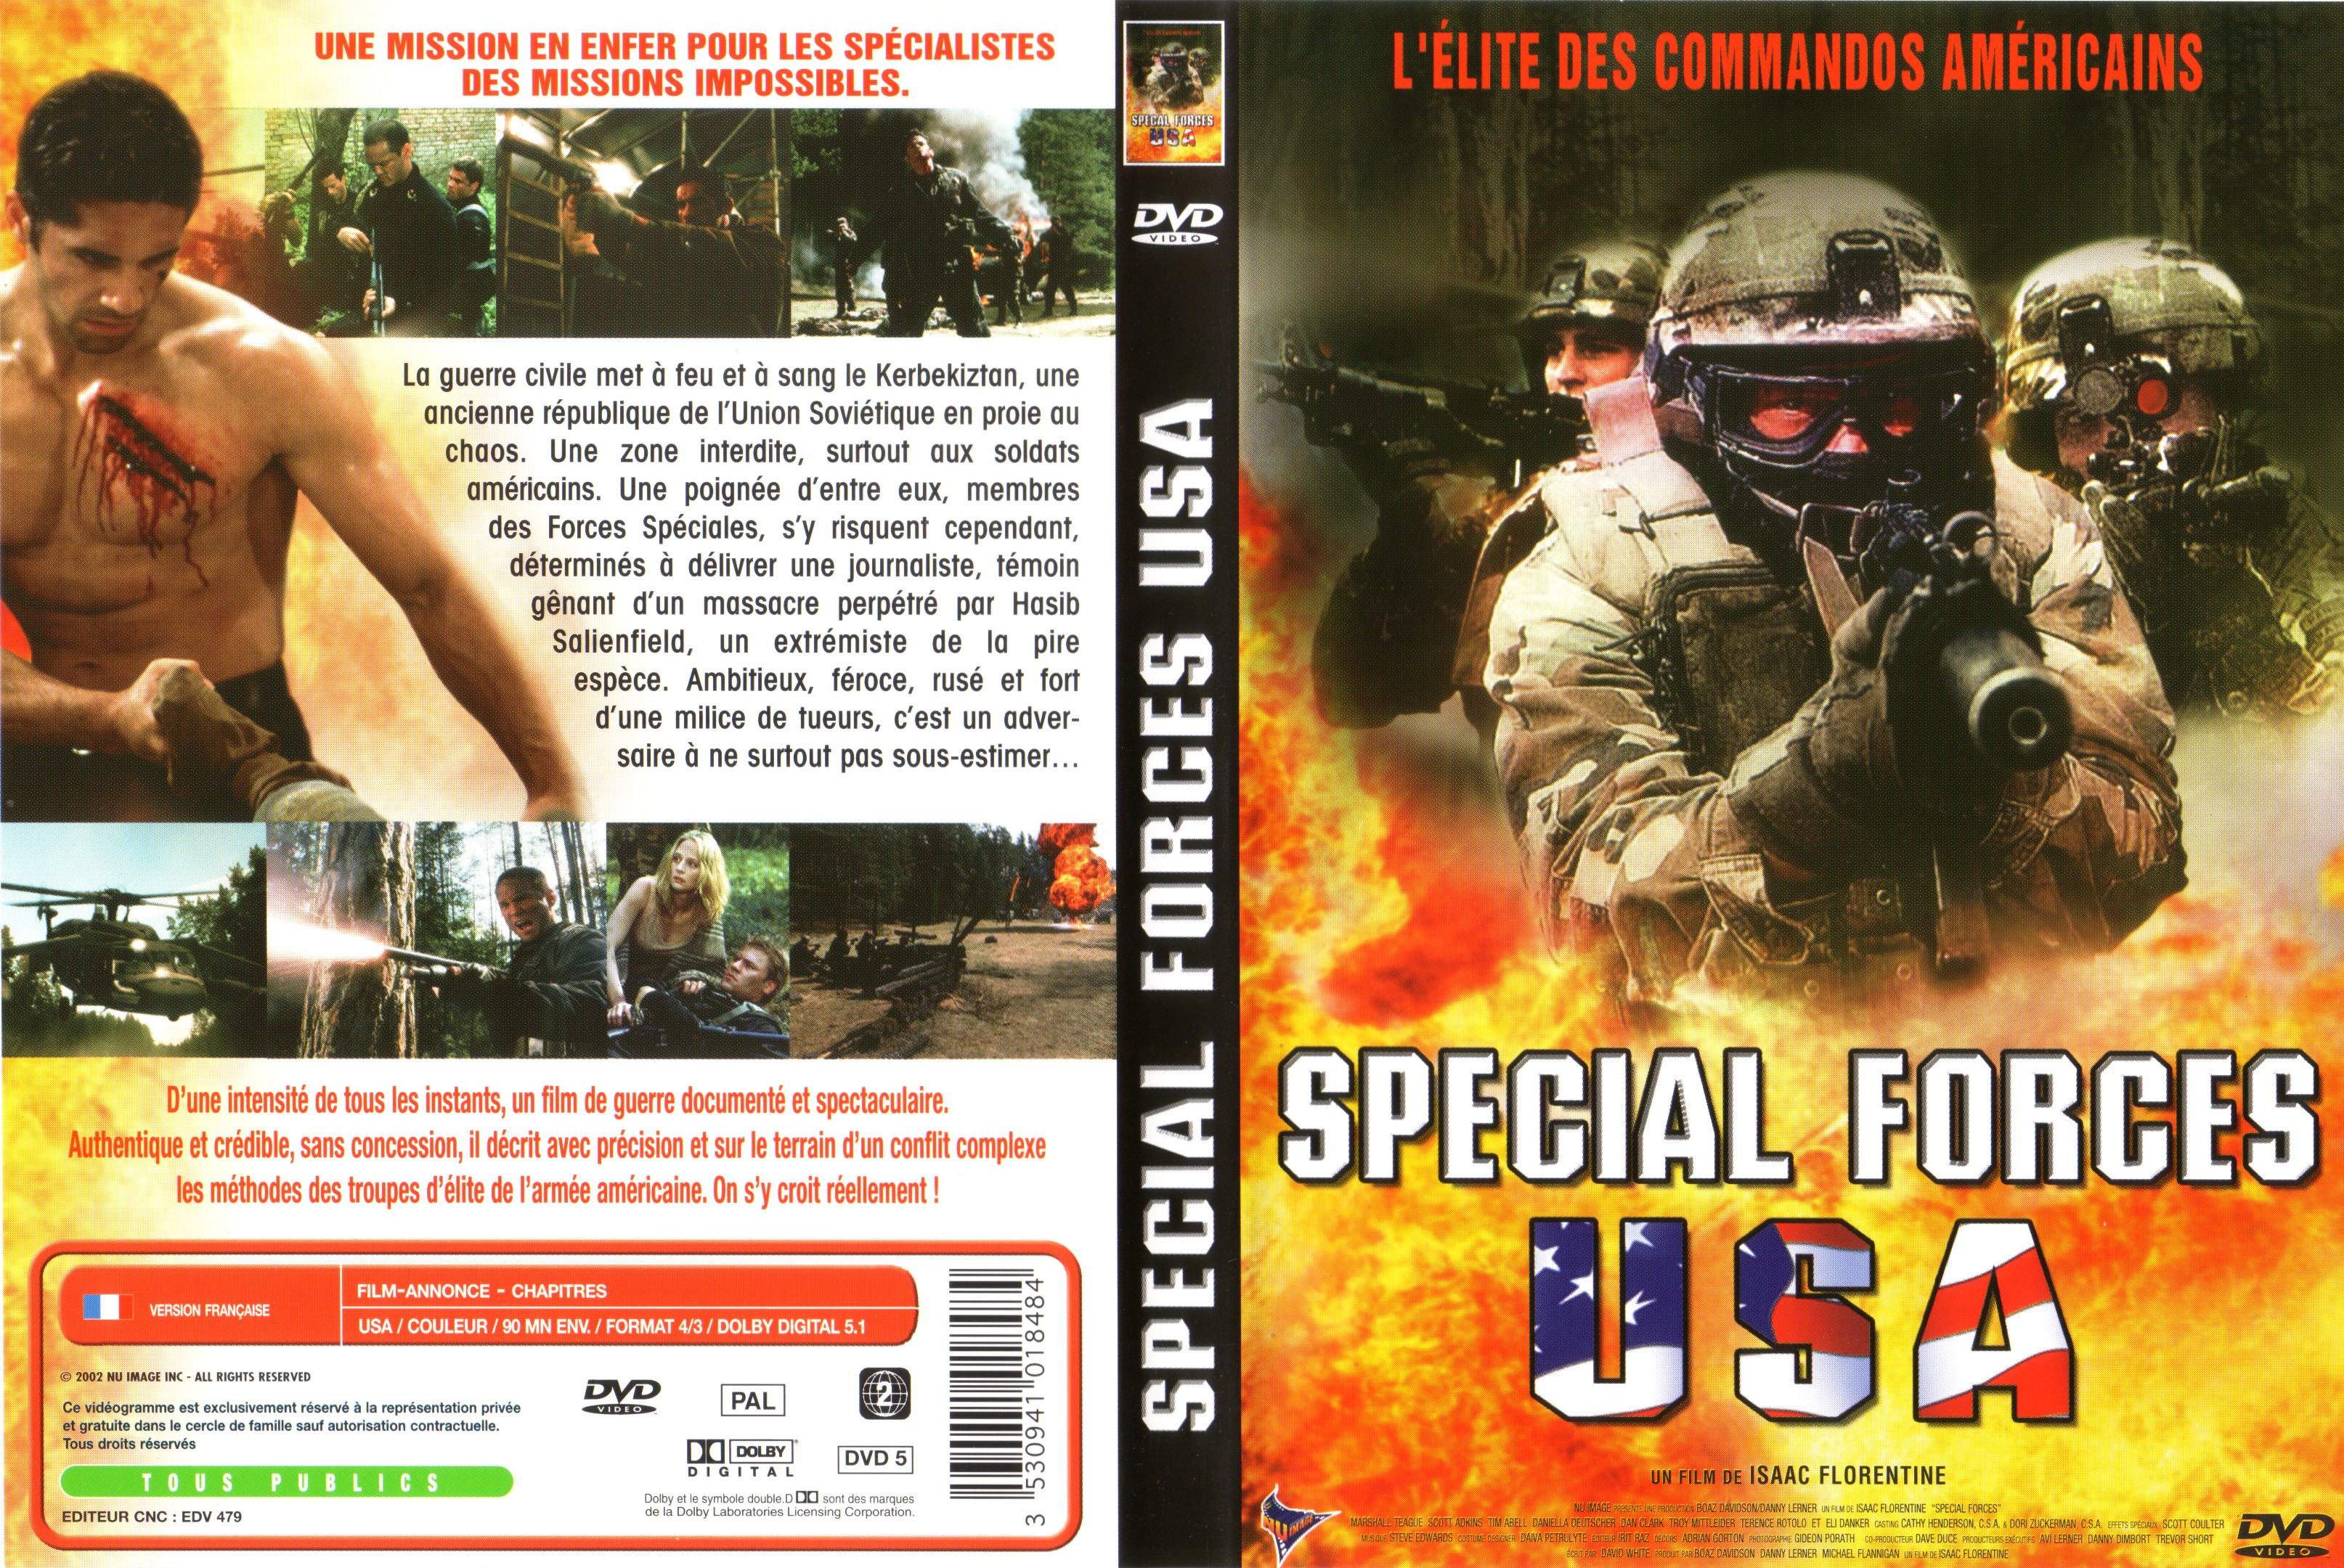 Jaquette DVD Special forces USA